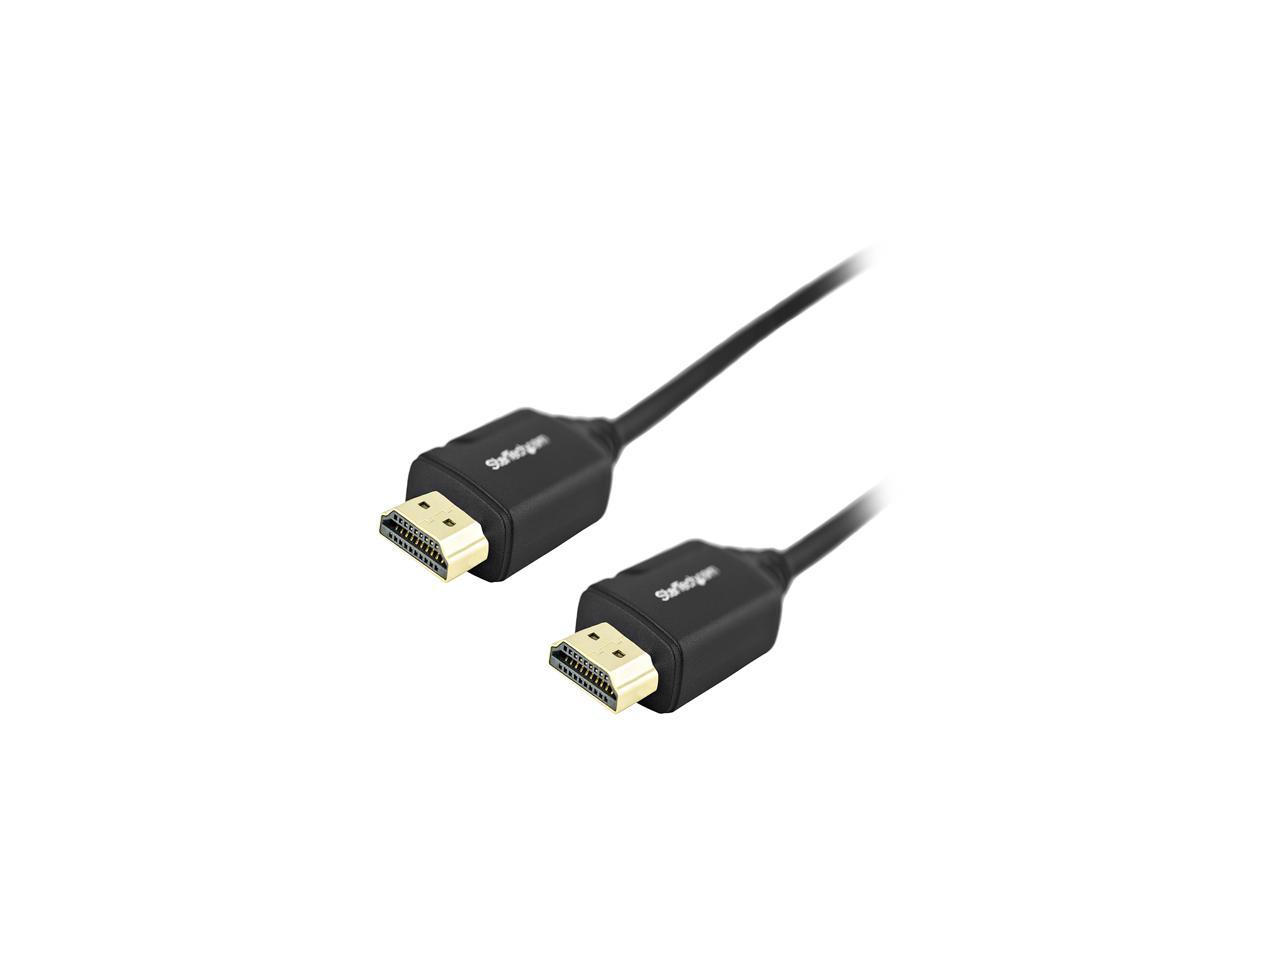 StarTech.com HDMM50CMP 4K HDMI Cable - 1.6 ft / 0.5m - Premium High Speed HDMI Cable w/ Ethernet - 4K 60Hz - HDMI 2.0 Cable - Short HDMI Cable